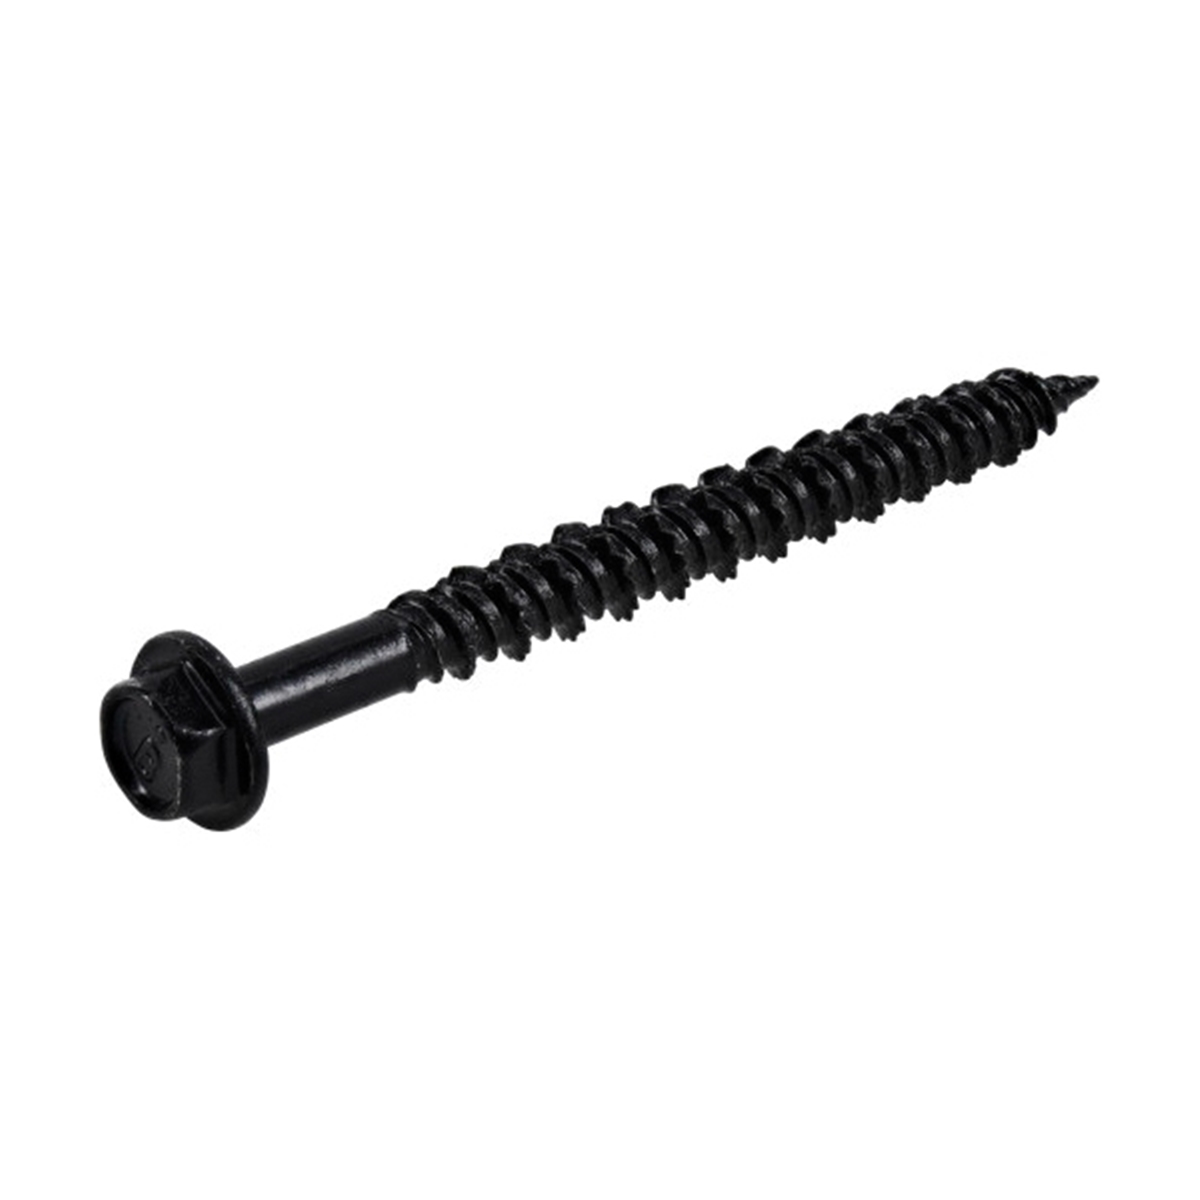 376577 Concrete Screw Anchor, 3/16 in Dia, 2-1/4 in L, Carbon Steel, Epoxy-Coated, 100/PK